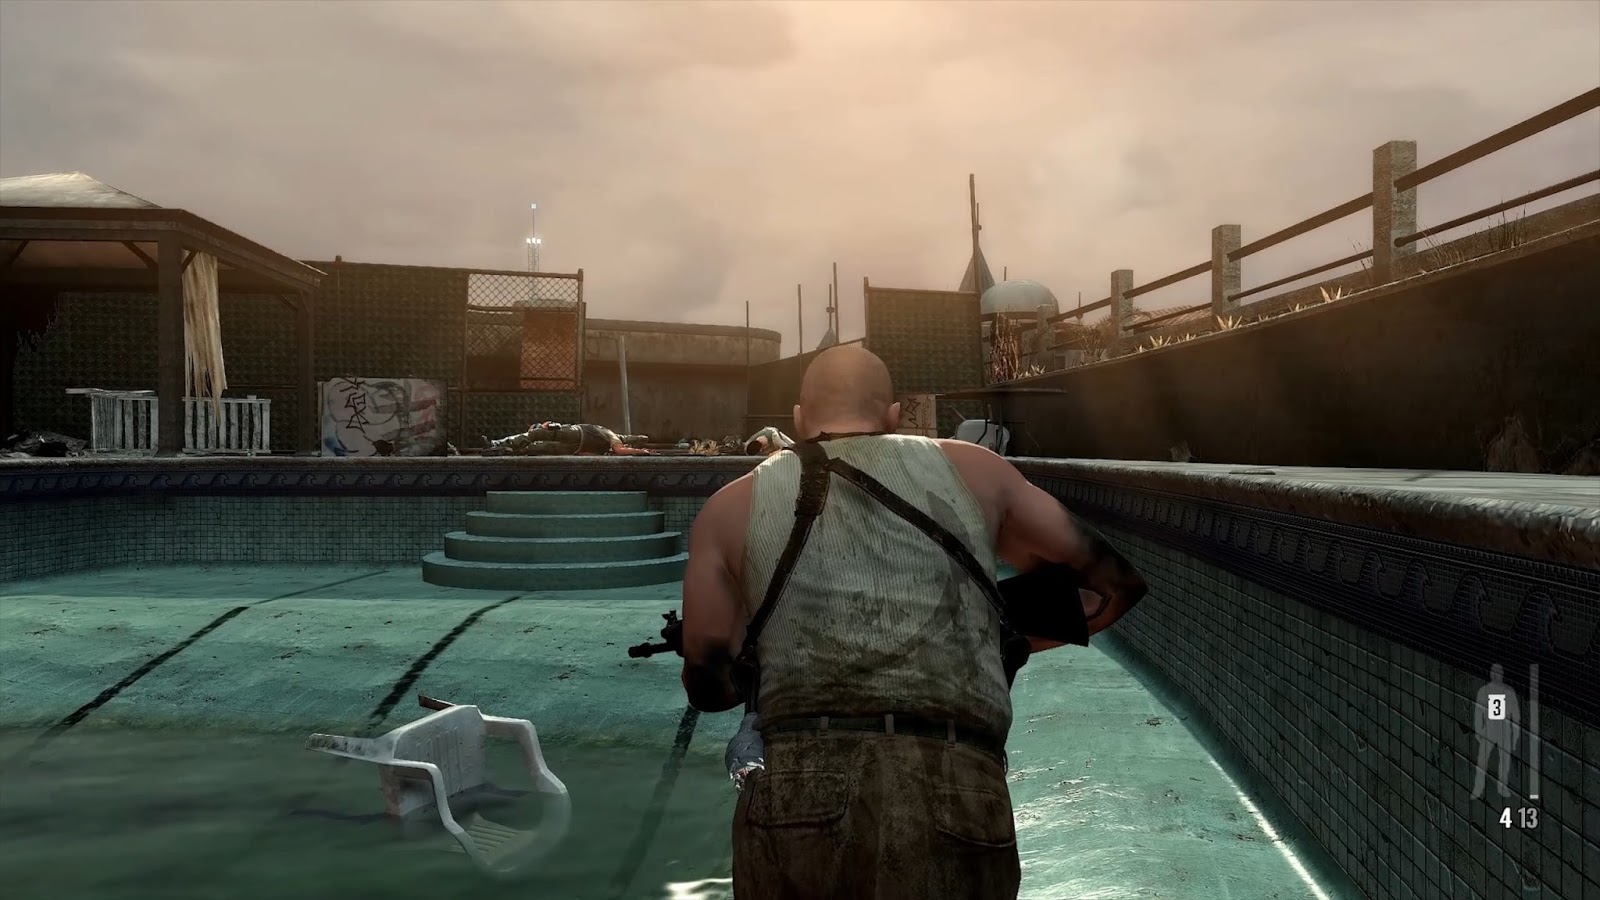 Max Payne 3 Remastered 2022 - Insane Graphics Mod And Ray Tracing! 